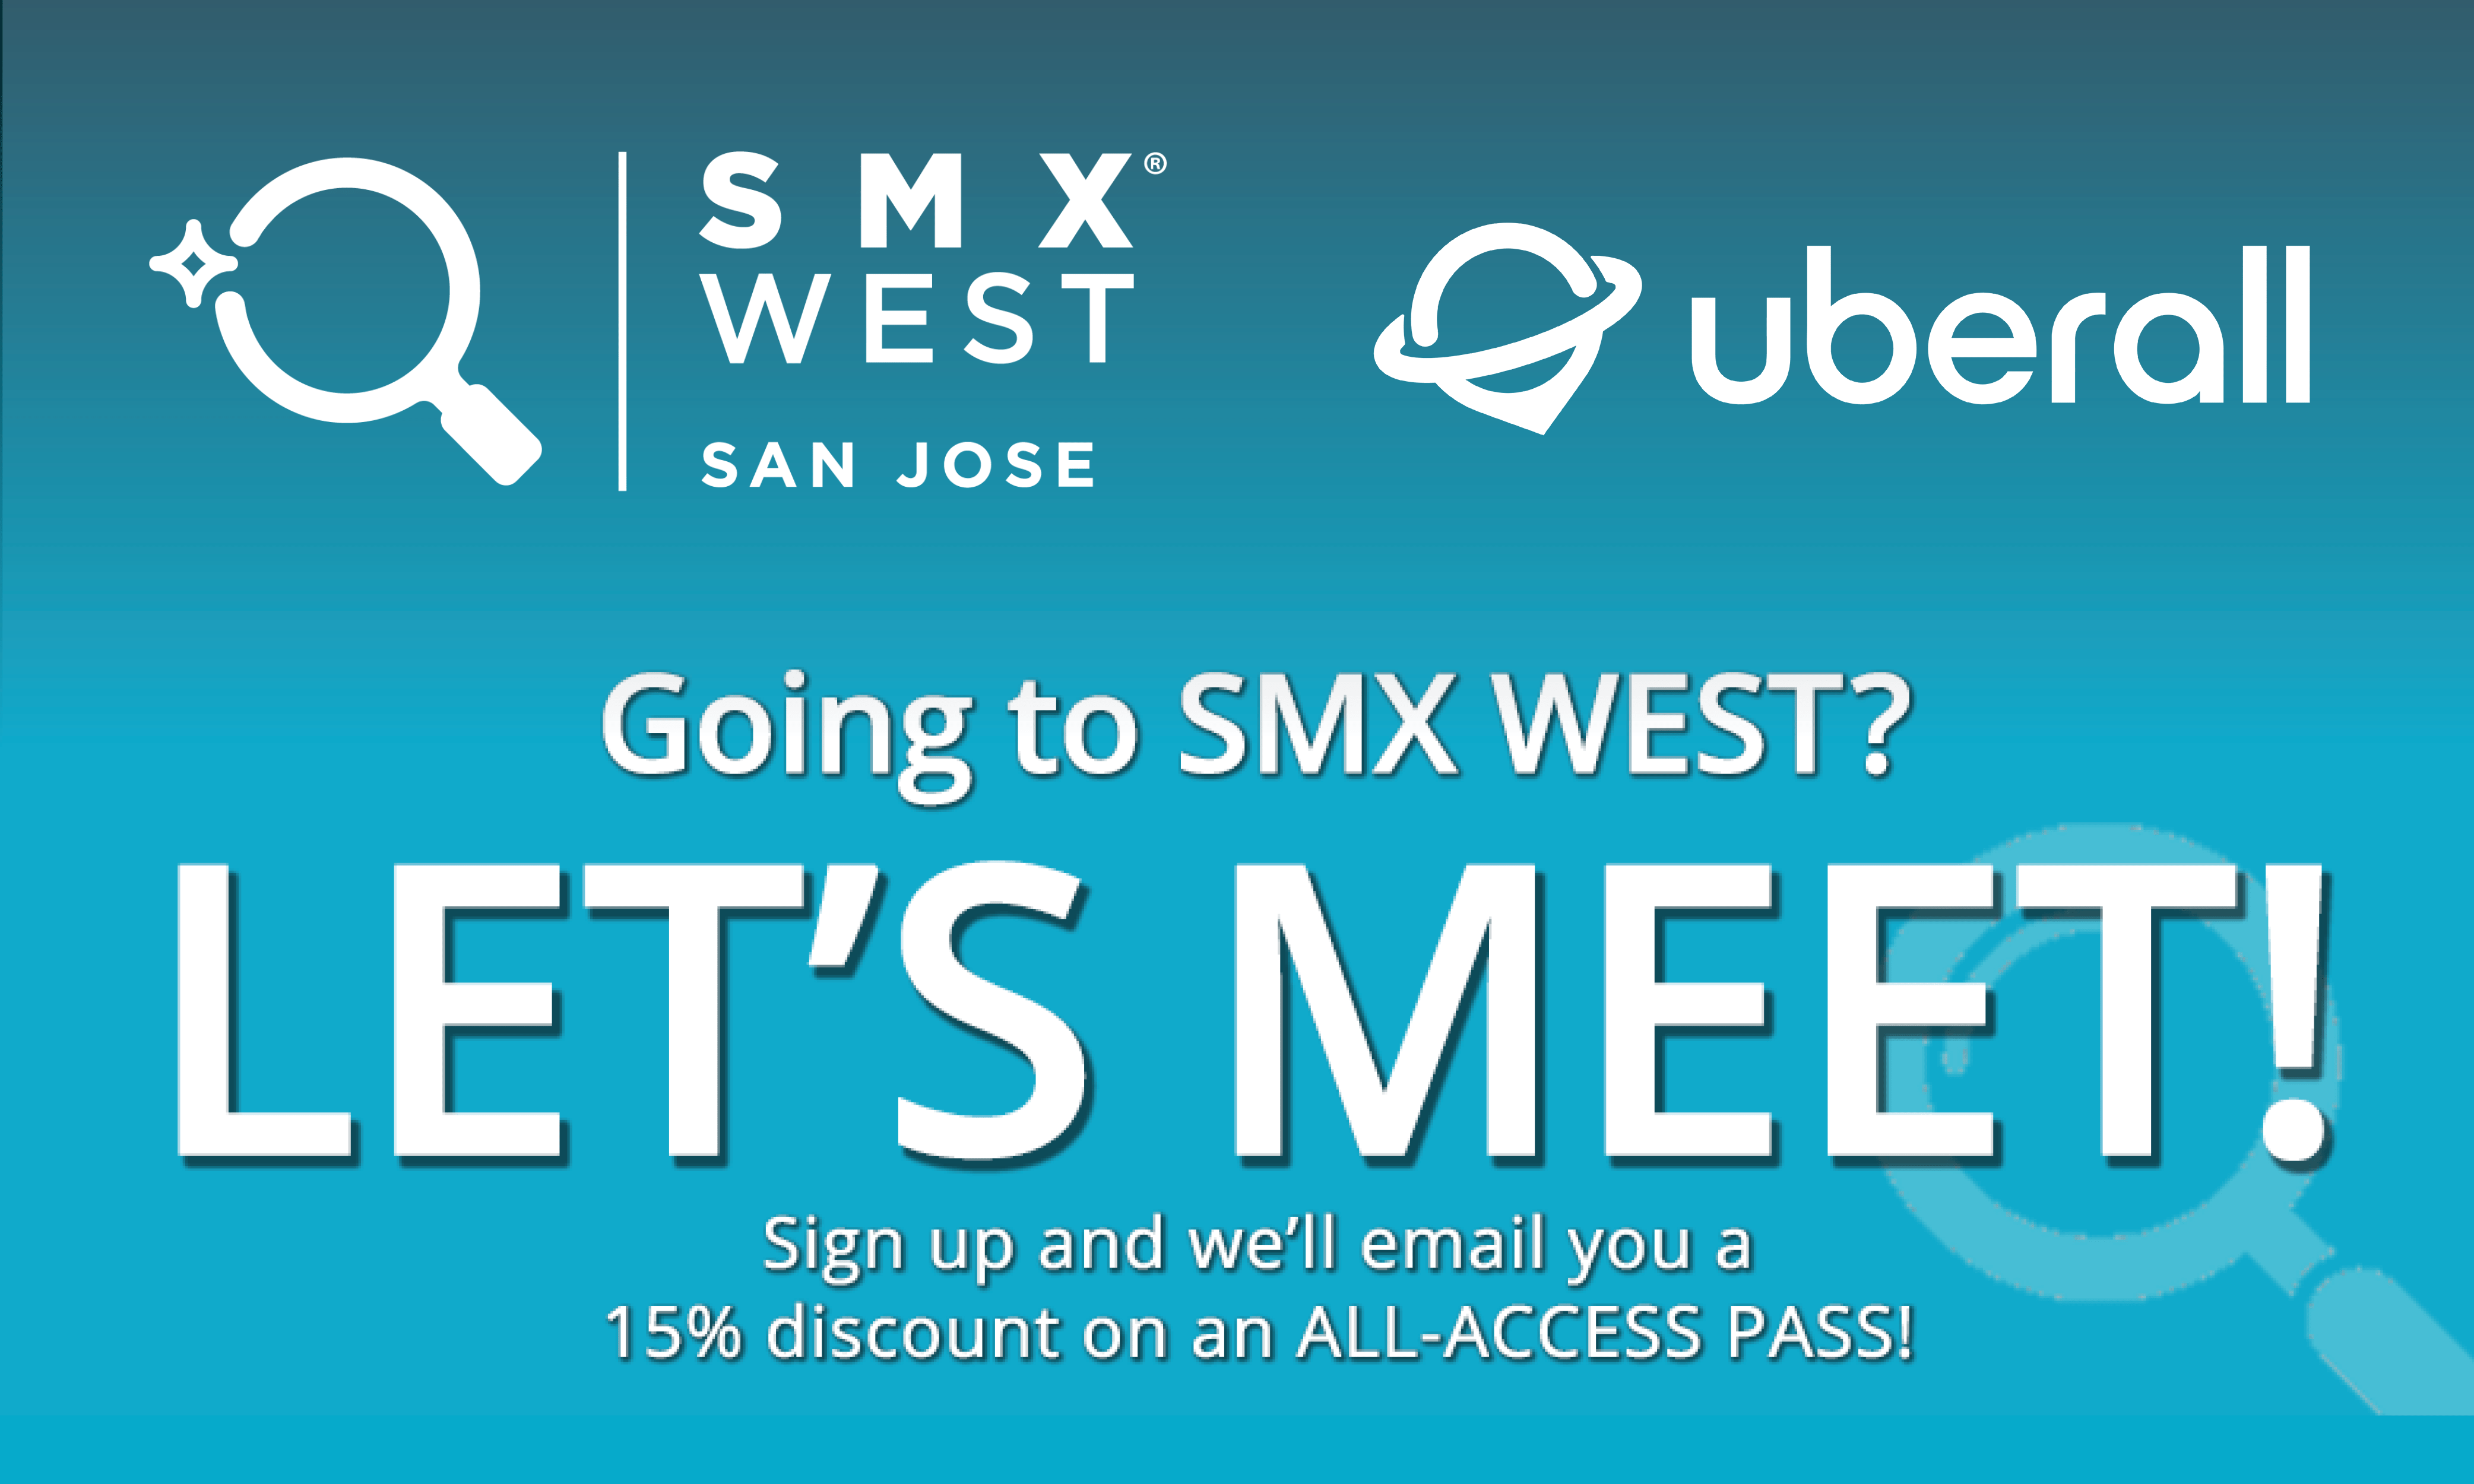 Will you be at SMX West?